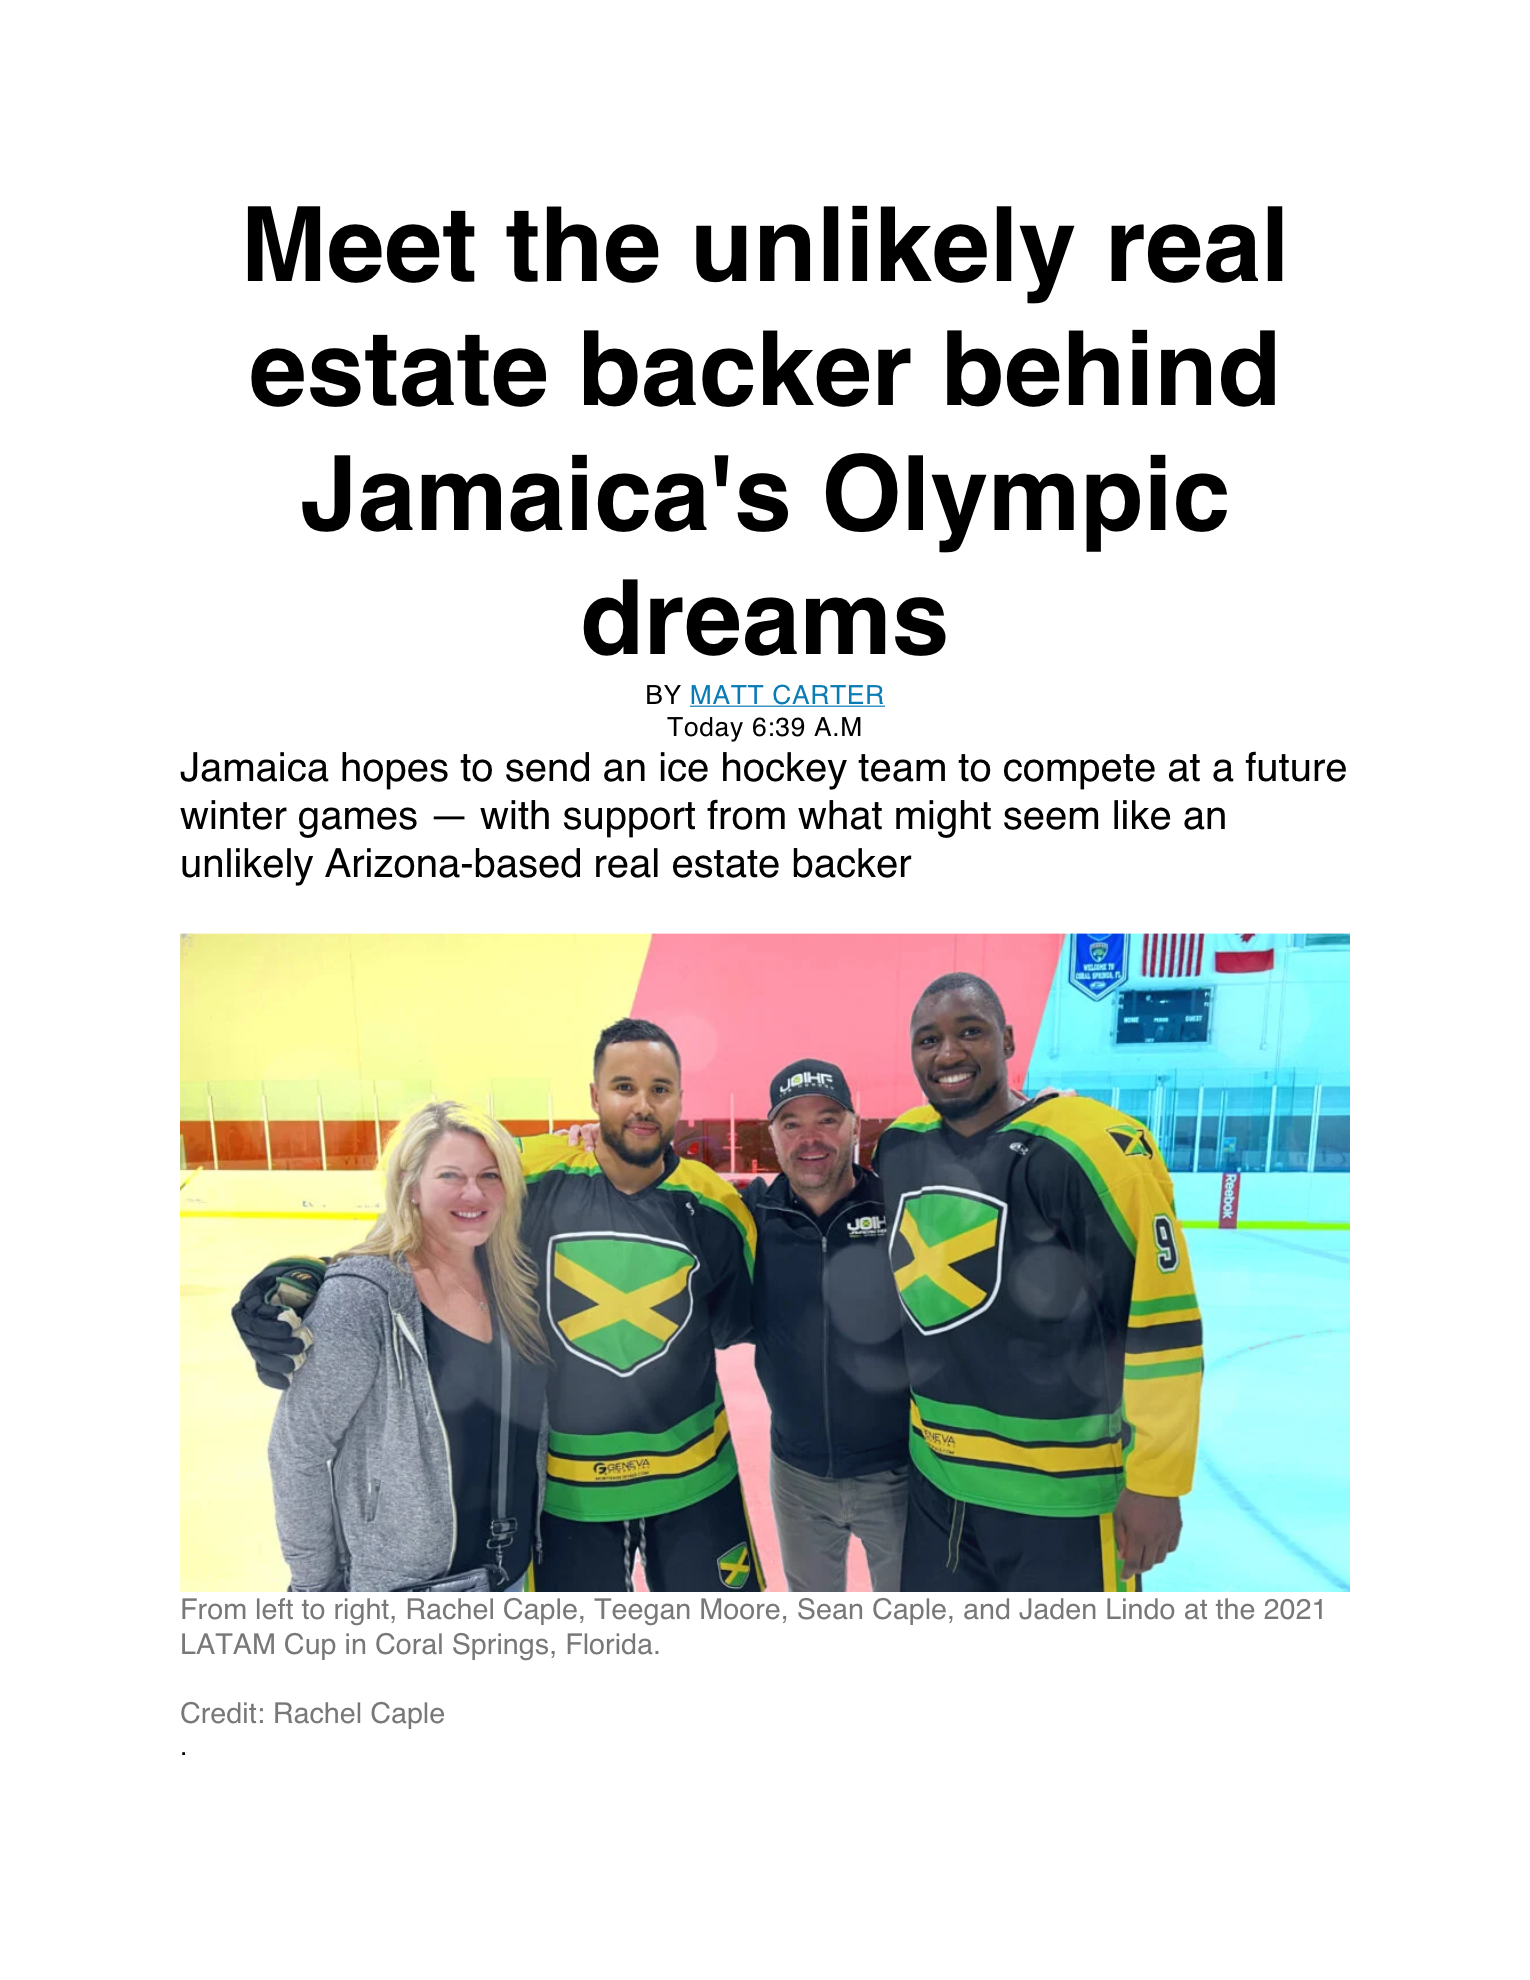 Geneva Financial Corporate and Colorado Branch Announce Core Sponsorship of Jamaican Olympic Ice Hockey Federation.